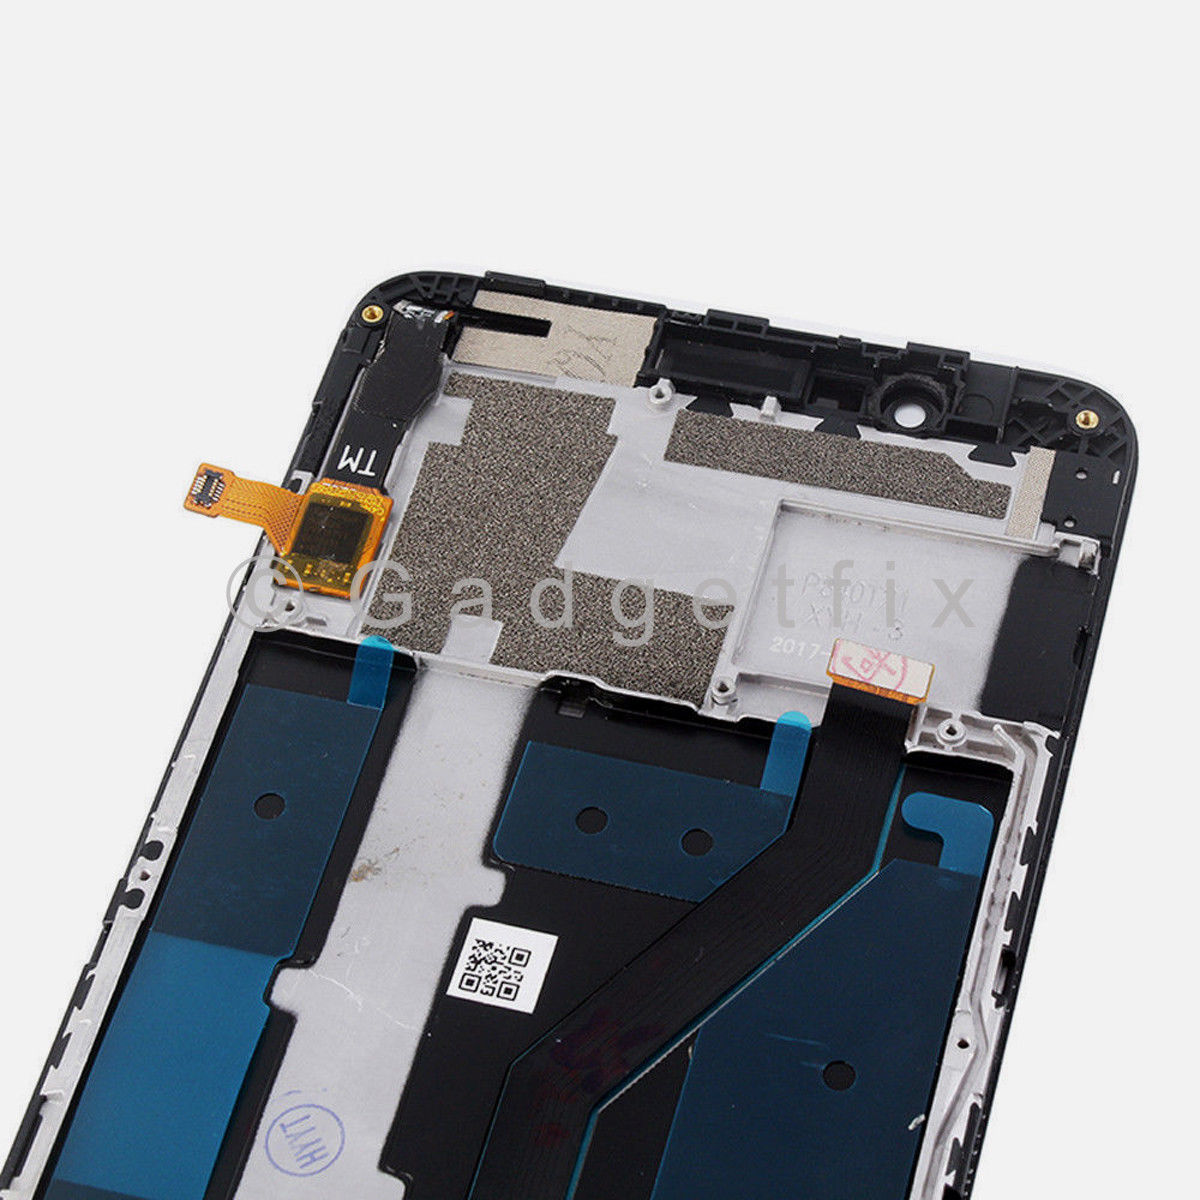 Display LCD Touch Screen Digitizer + Frame Replacement For ZTE Blade Z Max Z982 